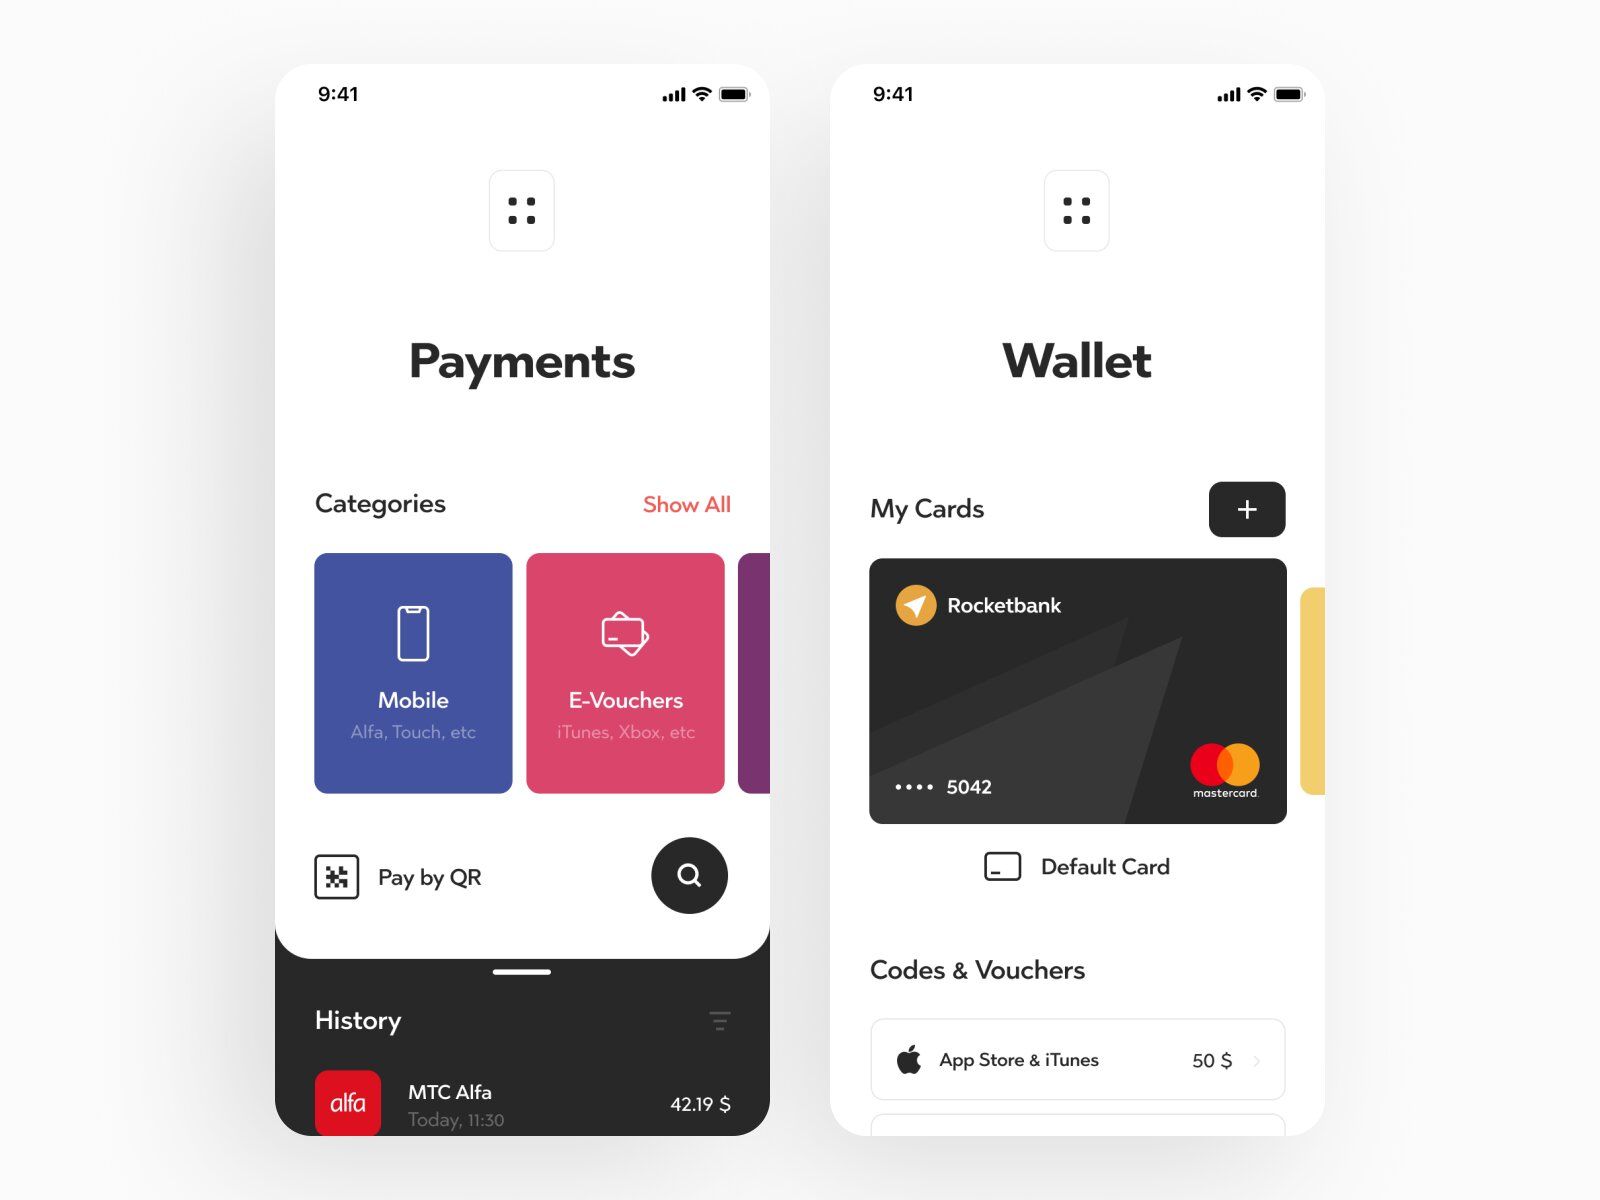 Mobile banking app development process should include making secure banking operations via mobile devices’ features (*image by [Cuberto](https://dribbble.com/cuberto){ rel="nofollow" .default-md}*)